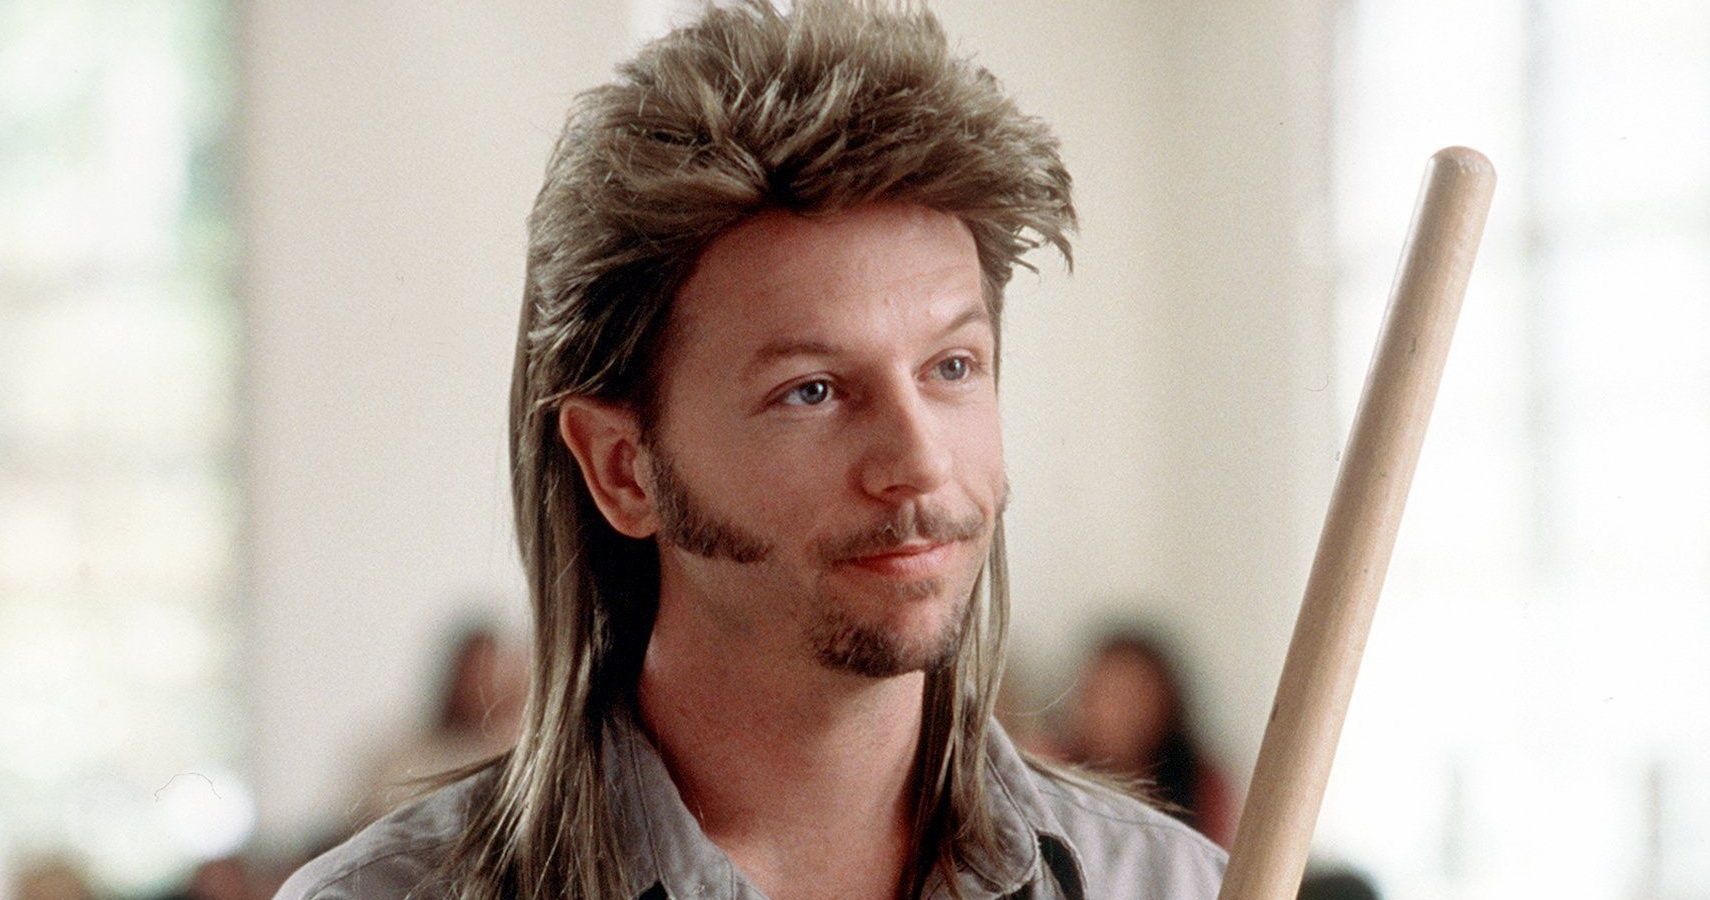 David Spade’s 5 Best (& 5 Worst) Movies According To Rotten Tomatoes